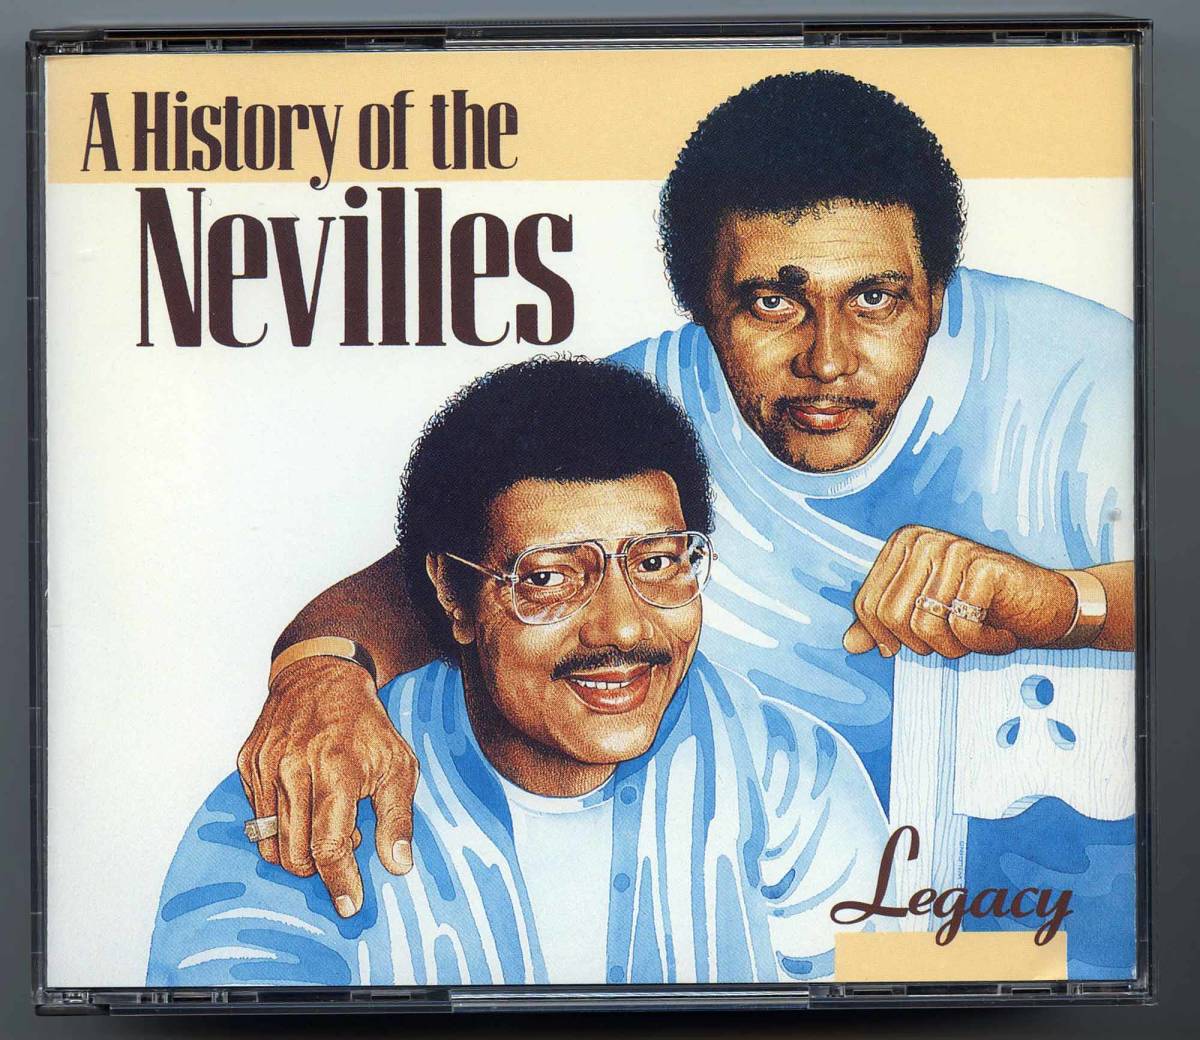 The Neville Brothers ザ ネヴィル ブラザーズ 2cdセット A History Of The Nevilles Eu盤 Cd Nev 1 新品同様 Jauce Shopping Service Yahoo Japan Auctions Ebay Japan